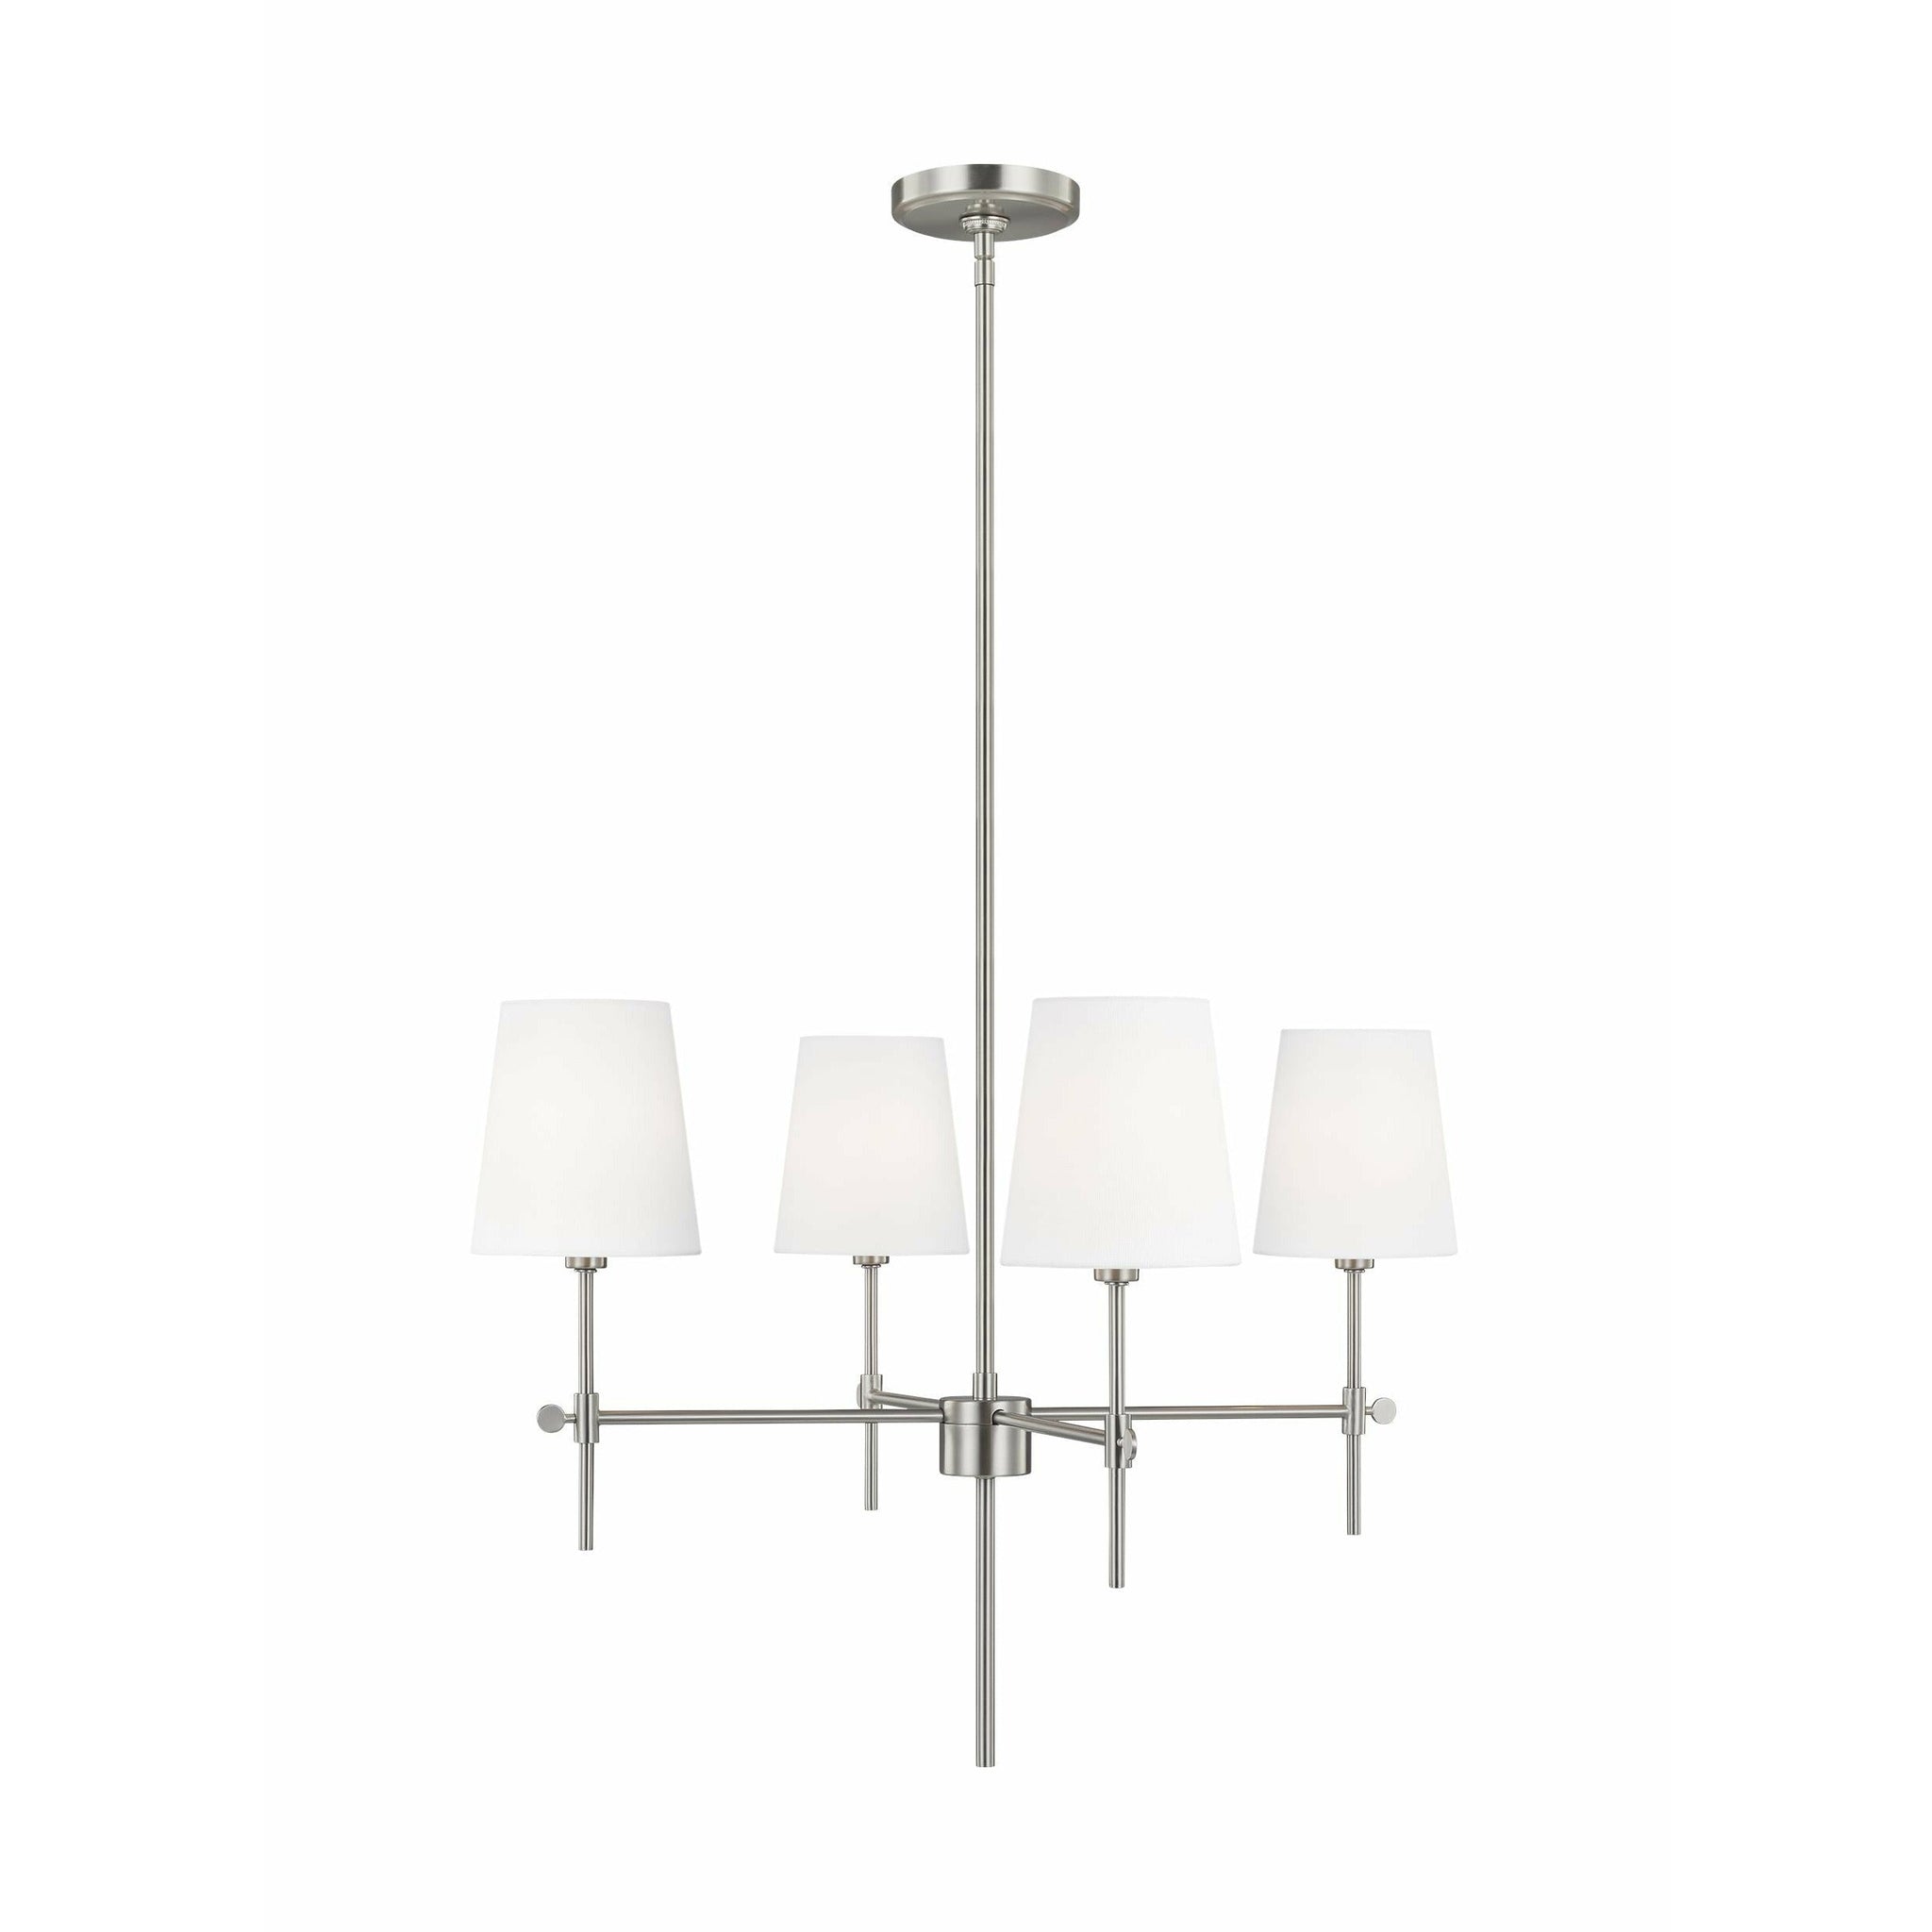 Baker 4-Light Small Chandelier (with Bulbs)